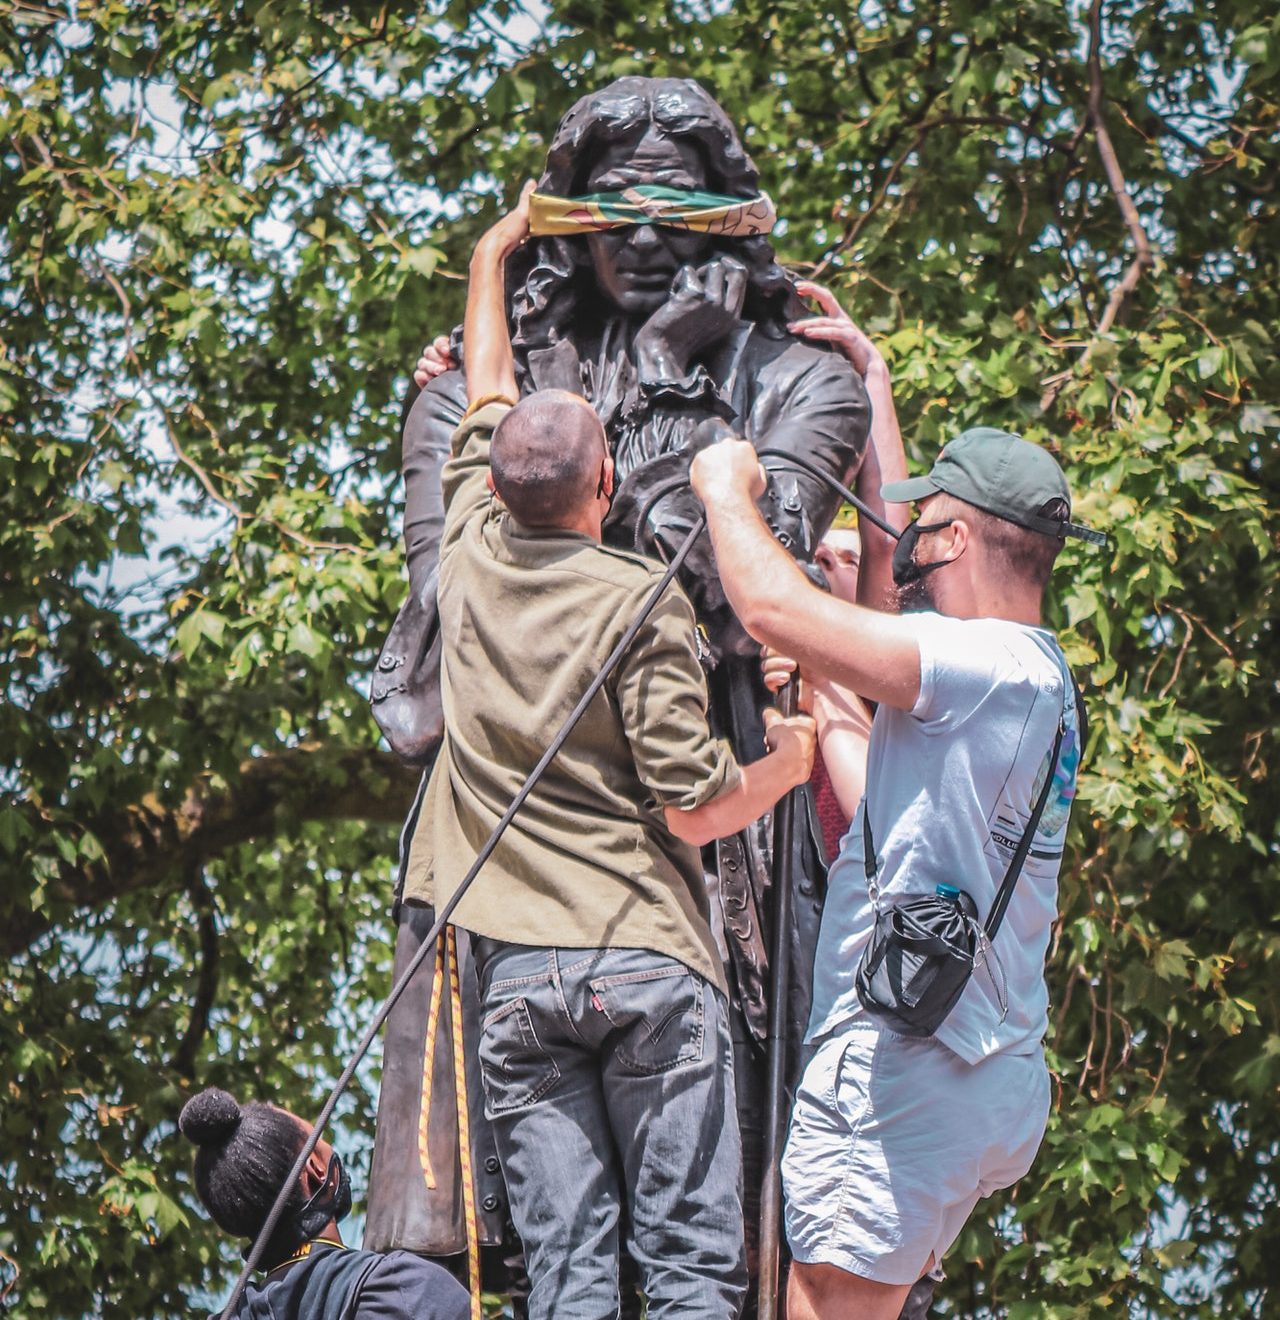 statue of Colston, blindfolded by activists